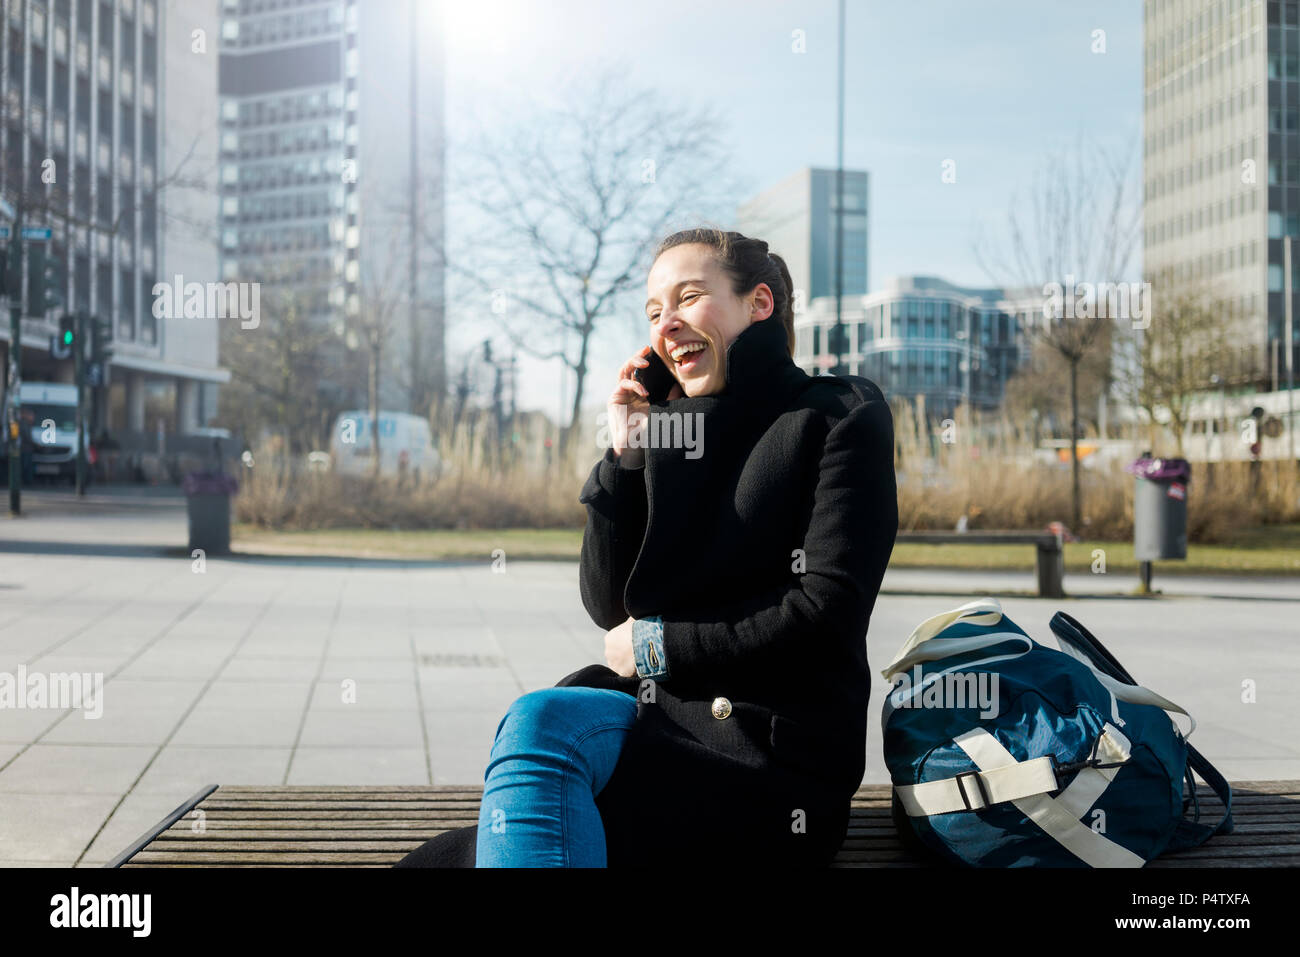 Germany, Essen, laughing young woman on the phone sitting on bench outdoors Stock Photo